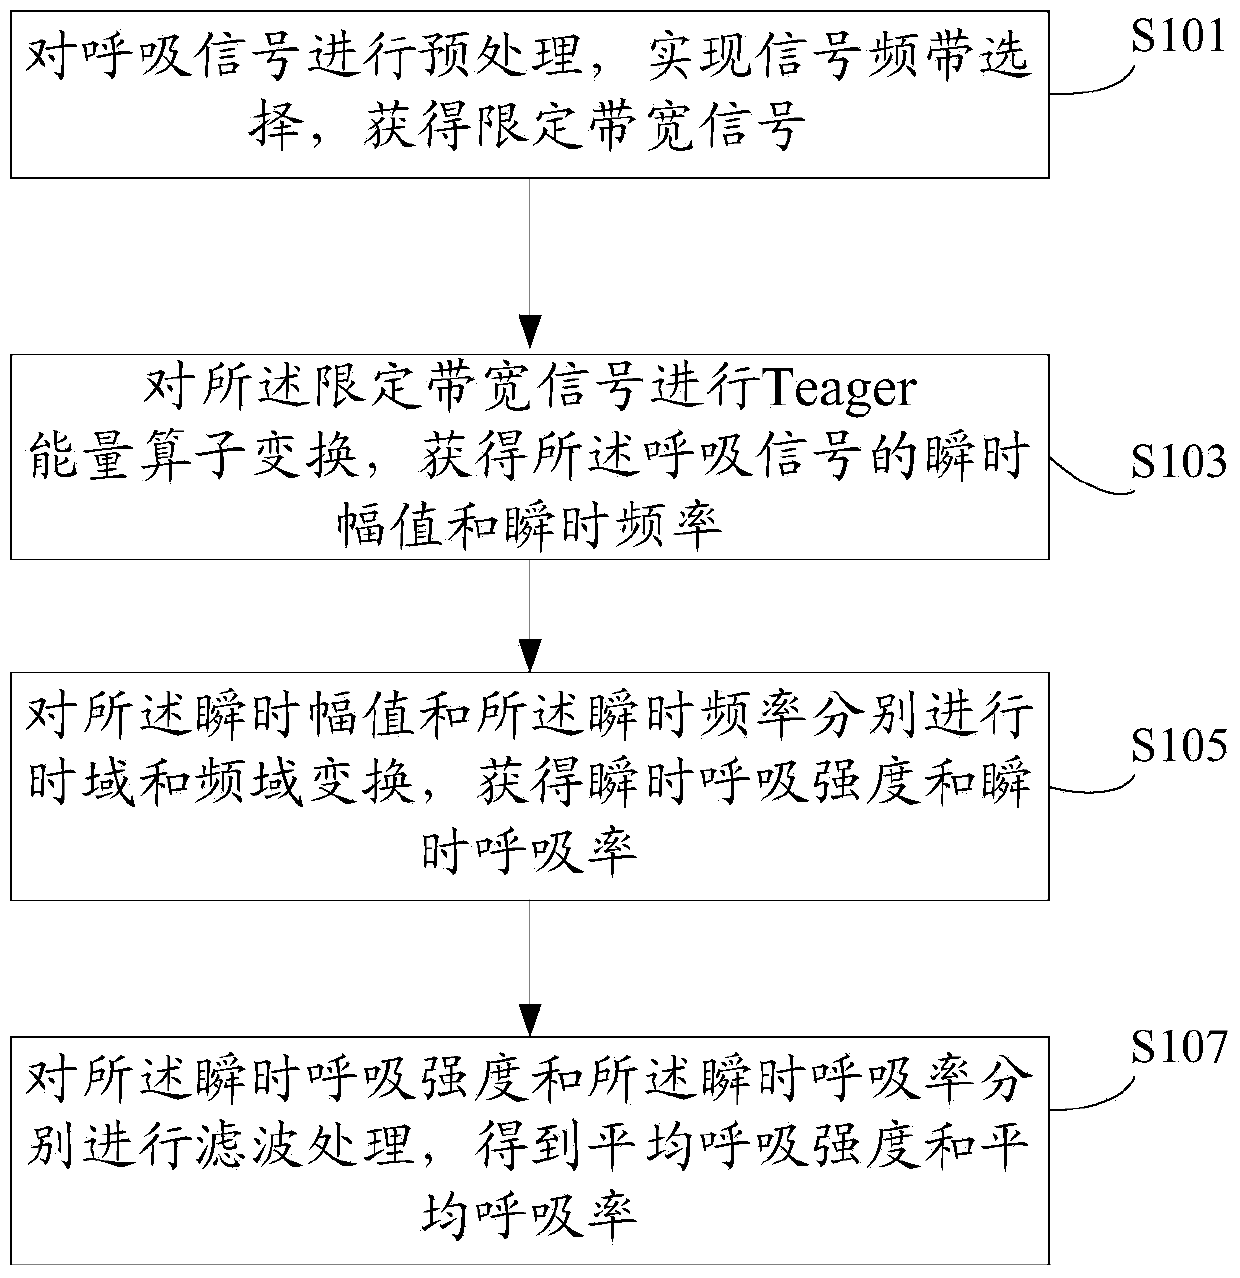 Respiration information detection method and system